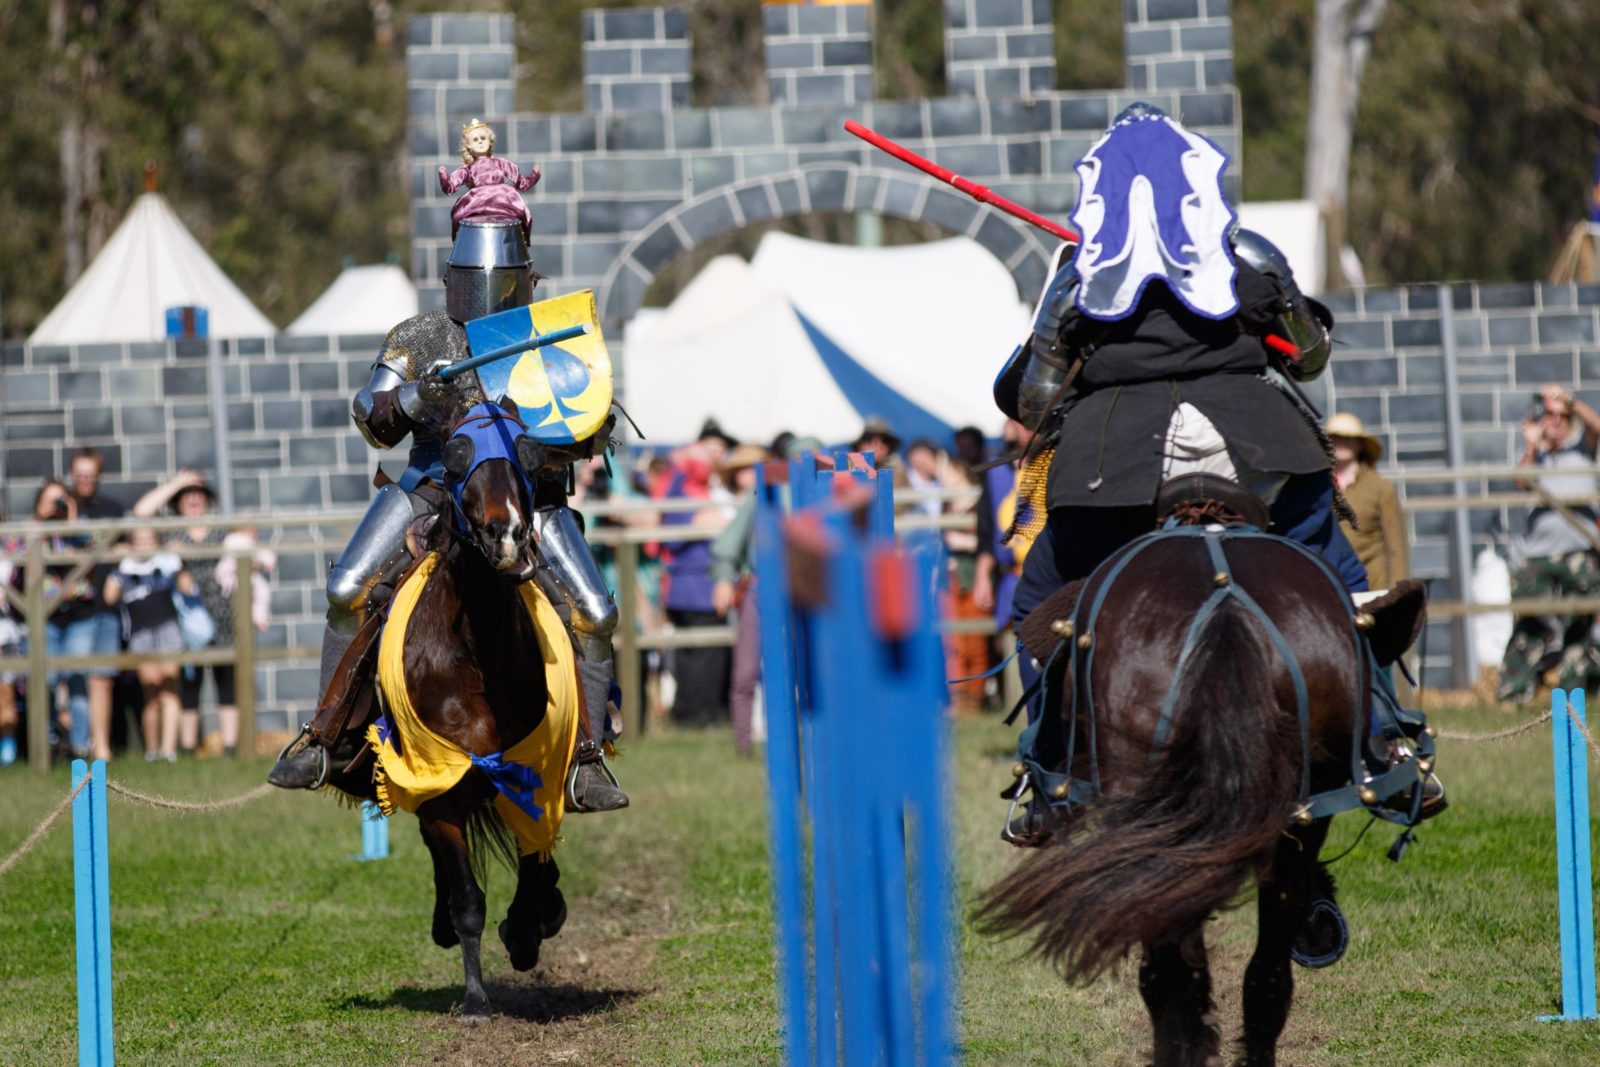 The excitement of the Joust!